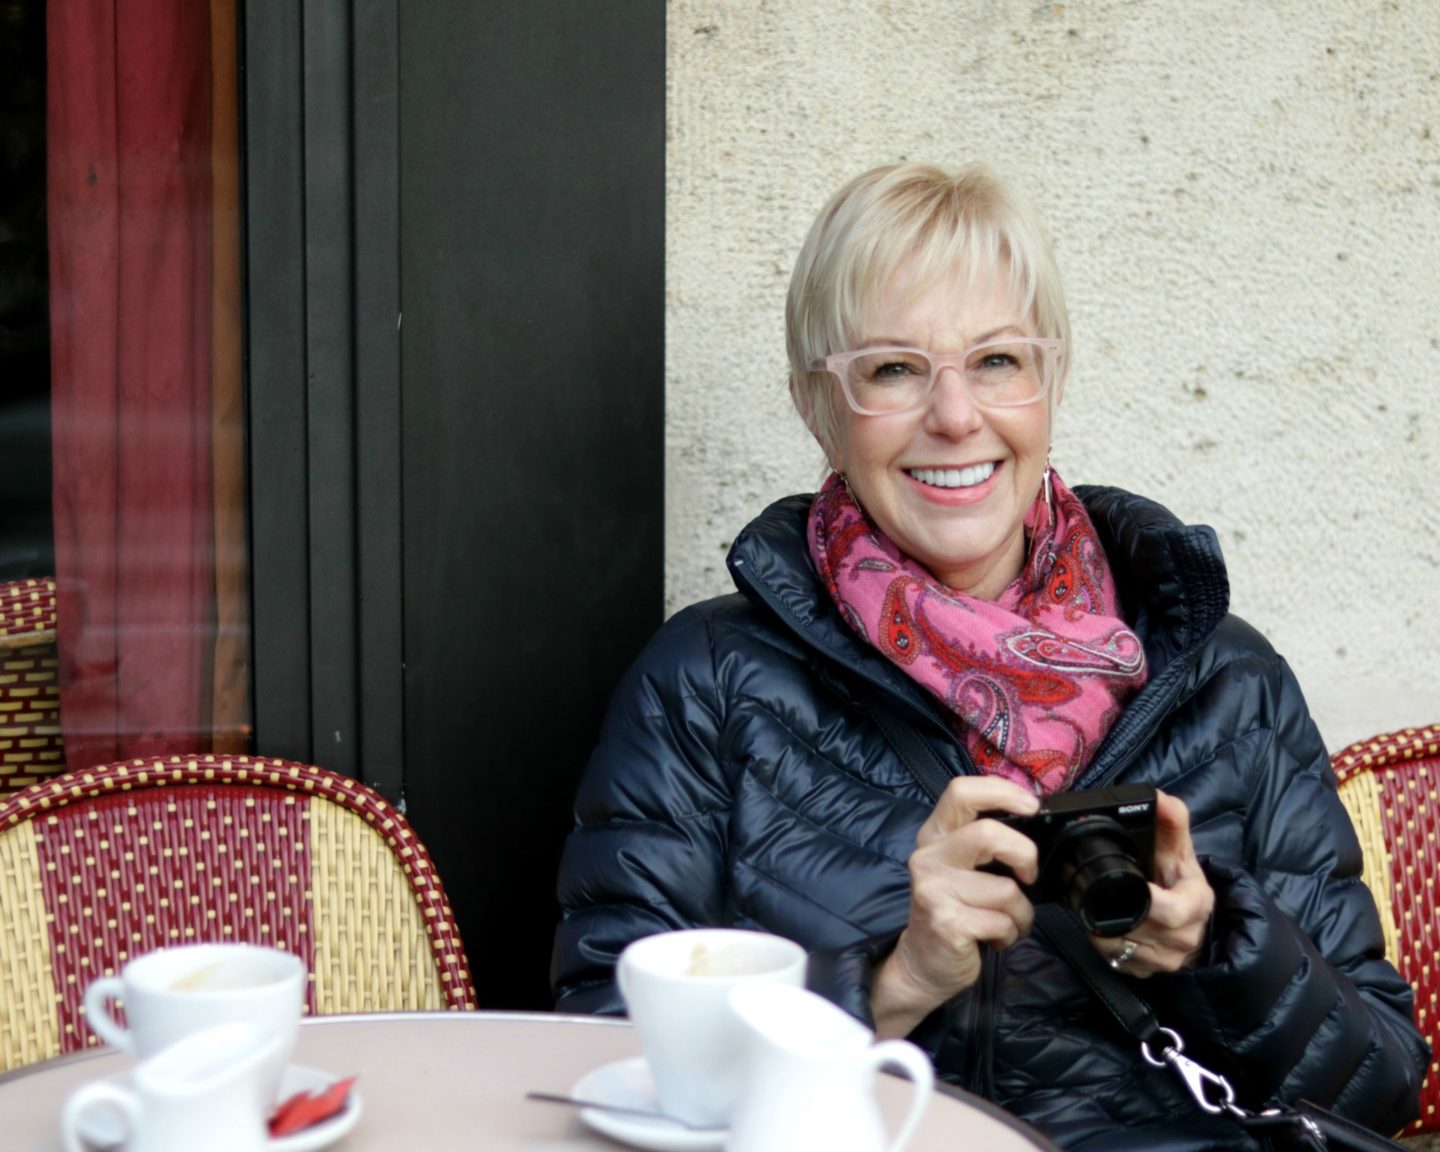 cafe creme and style spotting in Paris